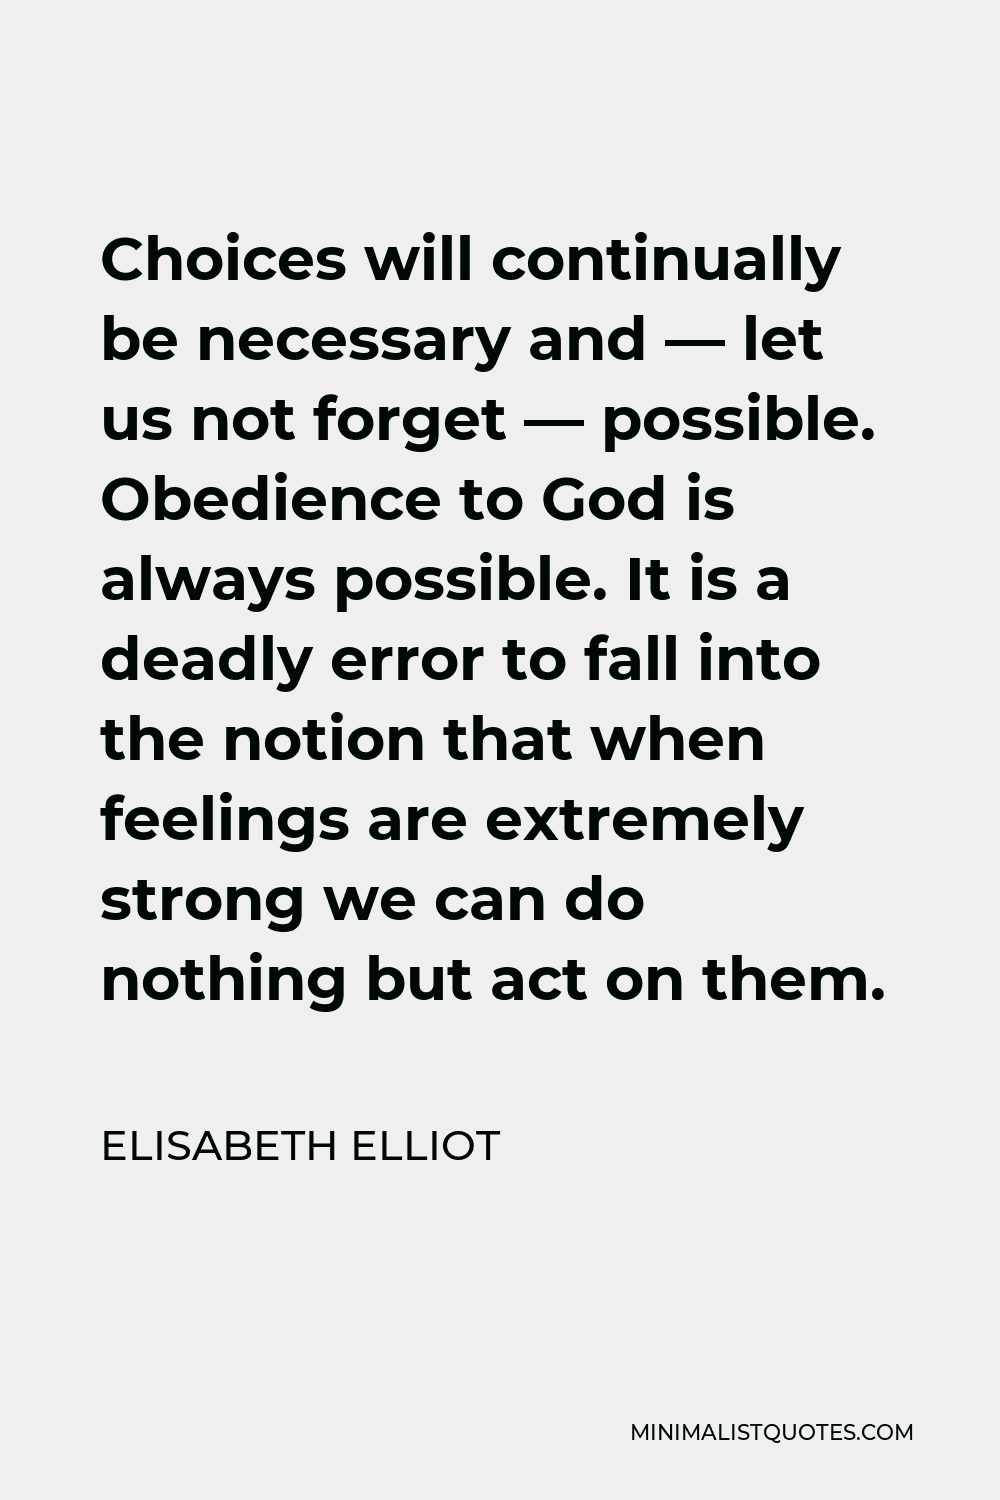 Elisabeth Elliot Quote - Choices will continually be necessary and — let us not forget — possible. Obedience to God is always possible. It is a deadly error to fall into the notion that when feelings are extremely strong we can do nothing but act on them.